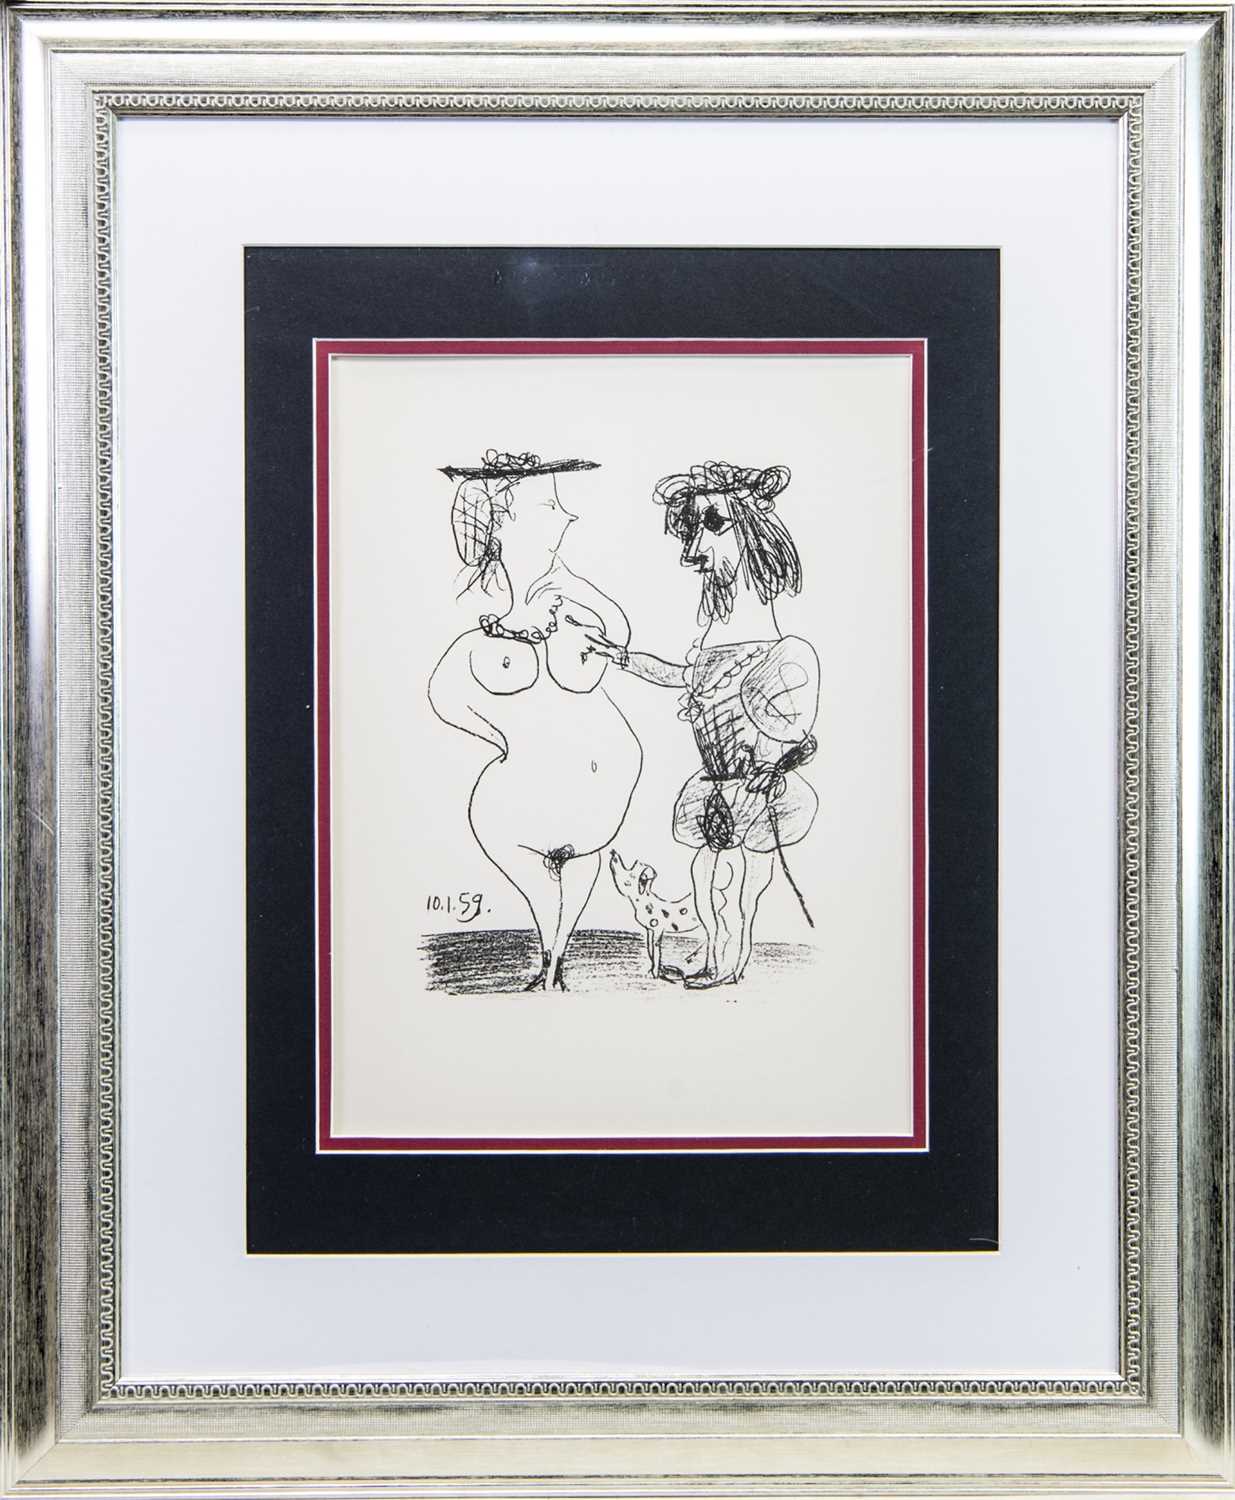 Lot 514 - ARTIST AND MODEL, A LITHOGRAPH AFTER PABLO PICASSO